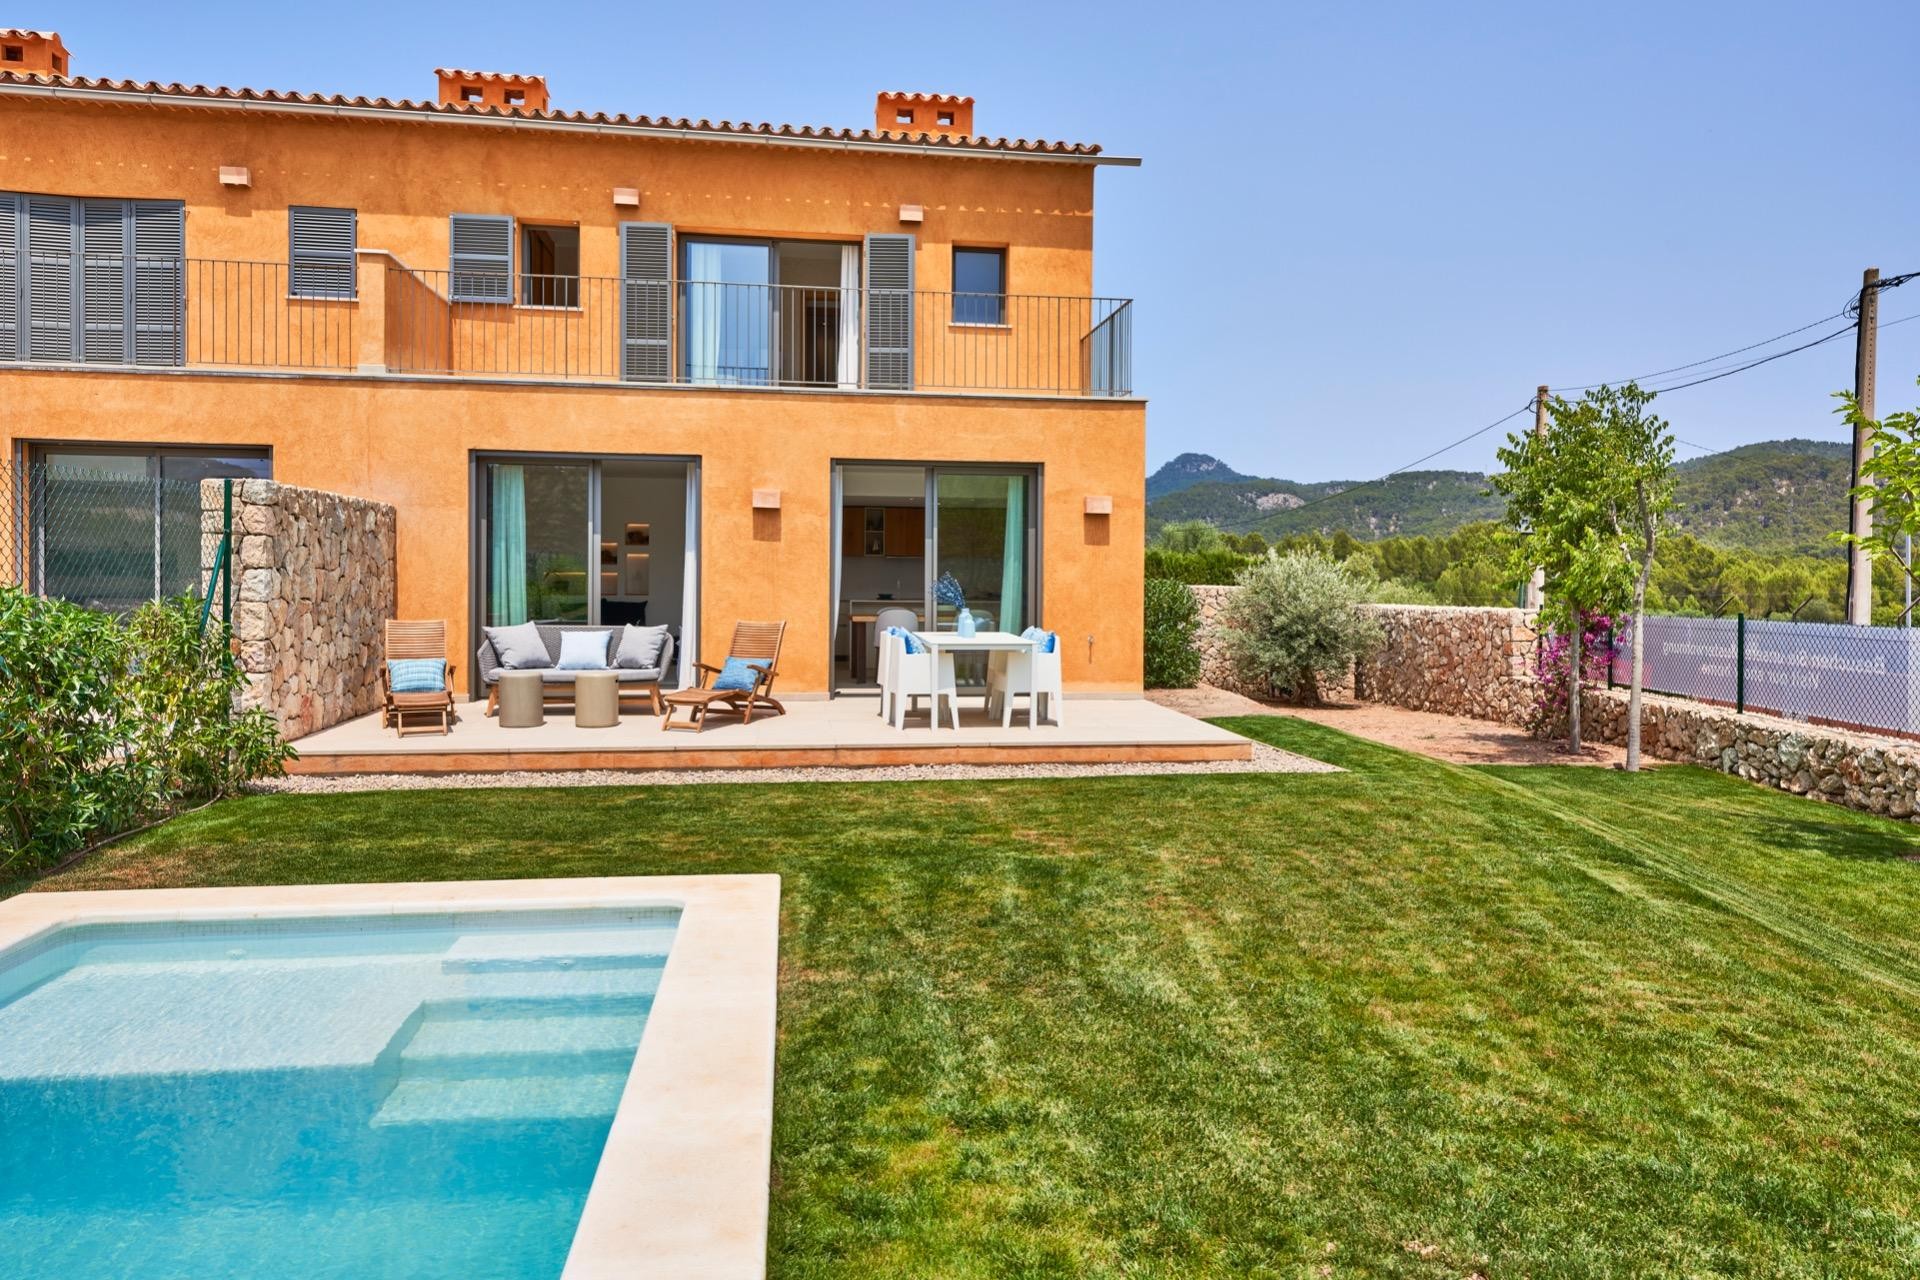 Beautiful newly built houses with private garden and swimming pool in a stunning natural landscape.